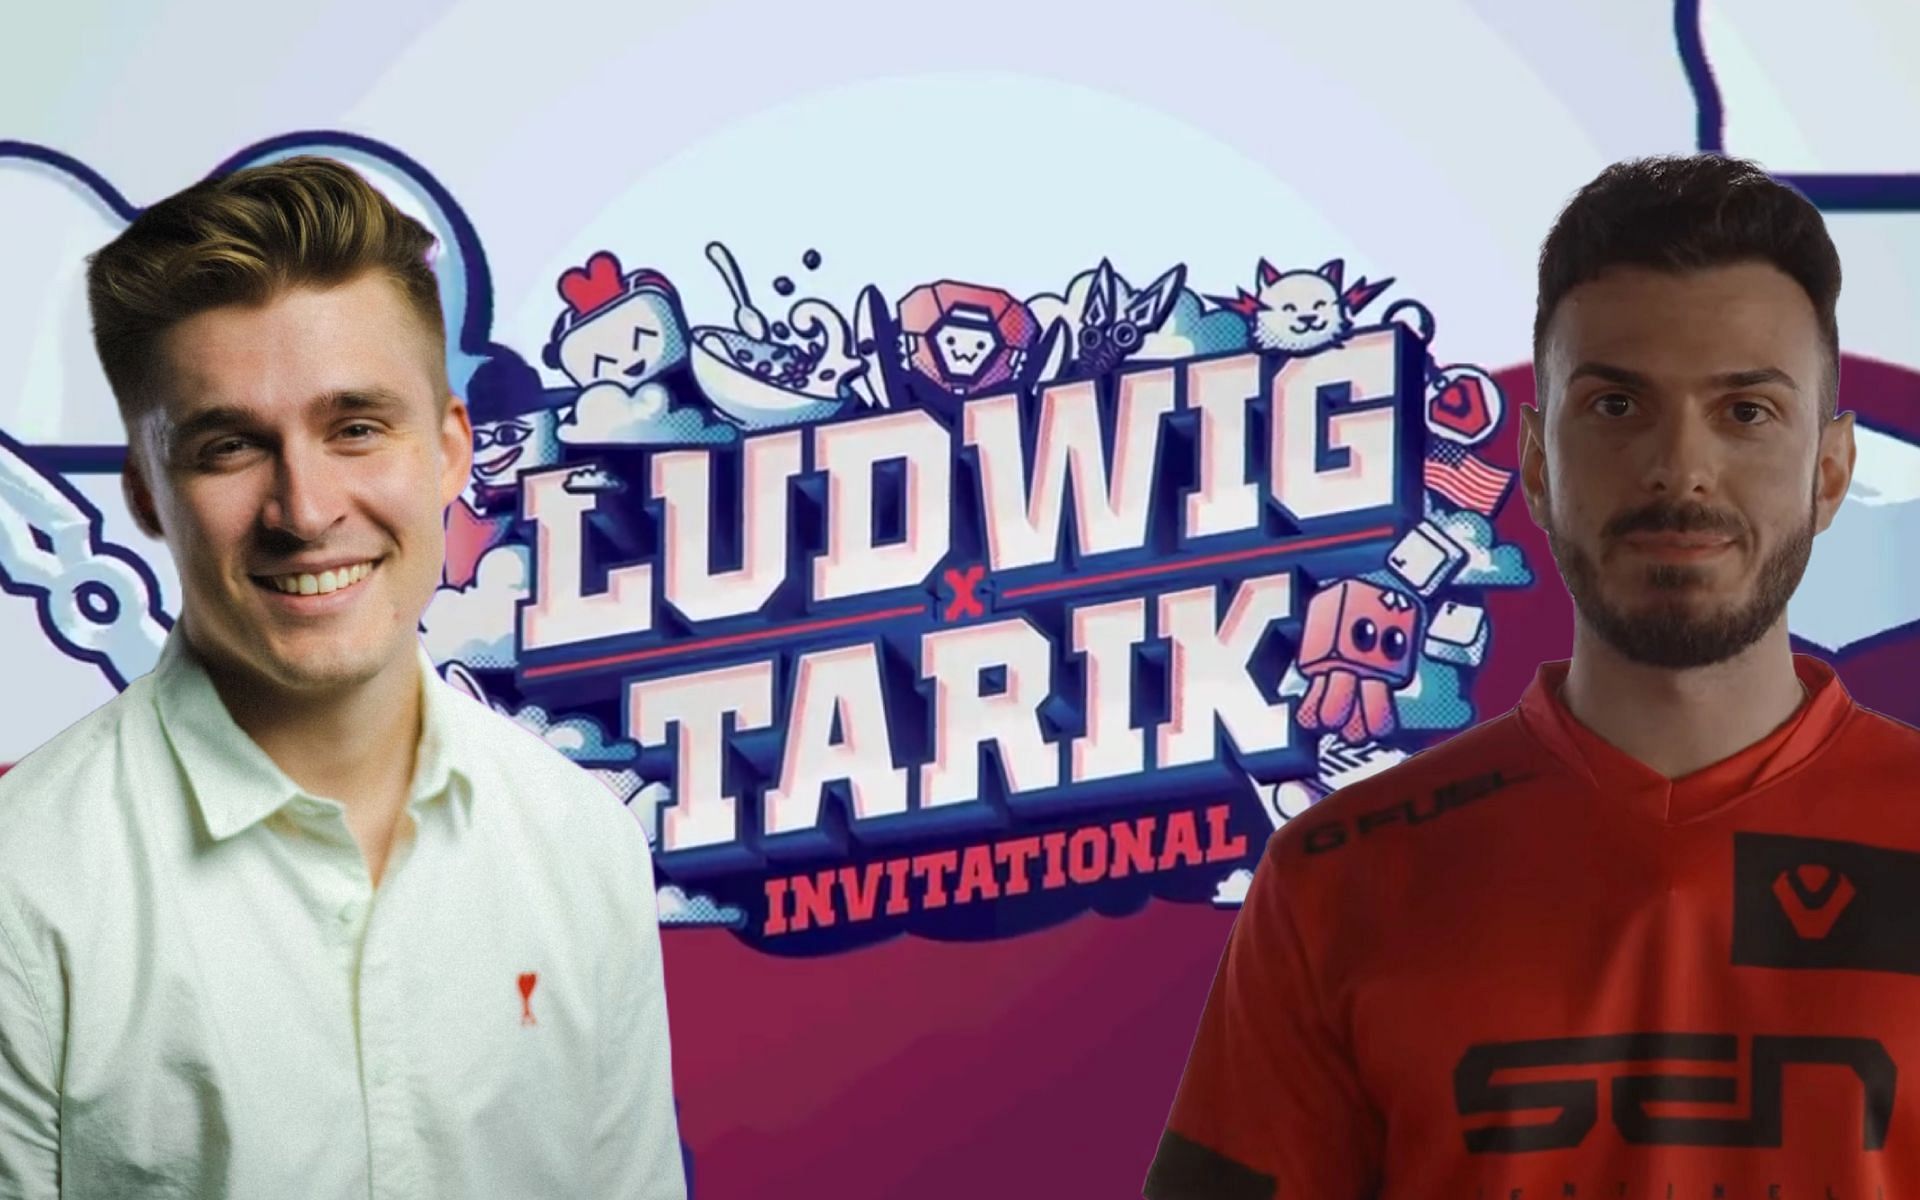 Four professional Valorant teams will be competing in Ludwig and Tarik